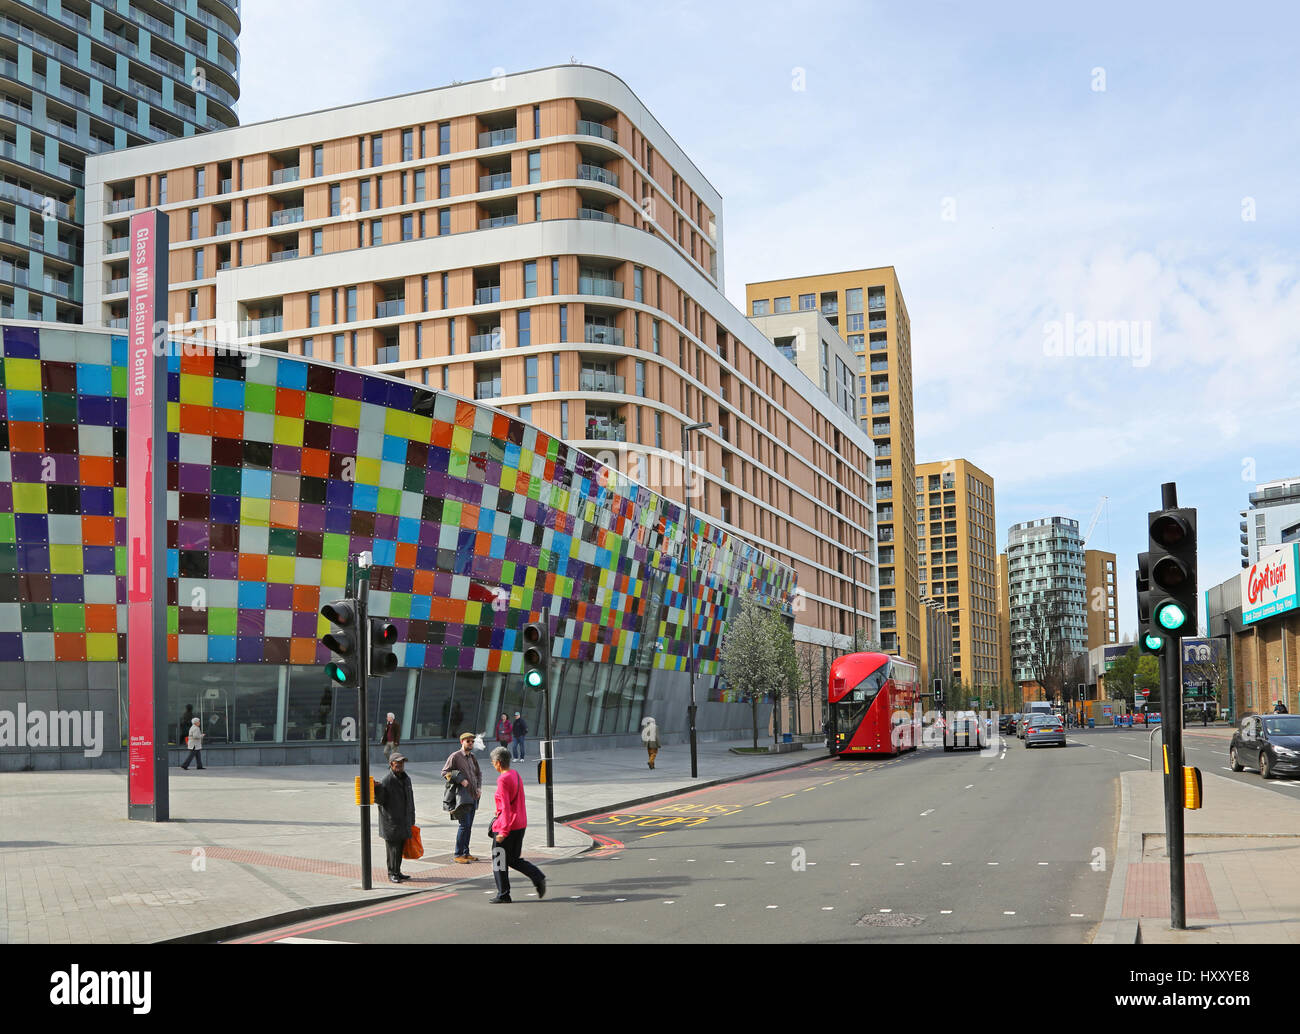 Lewisham town centre, southeast London, showing the brightly coloured façade of the new swimming pool, part of a major town centre redevelopment Stock Photo